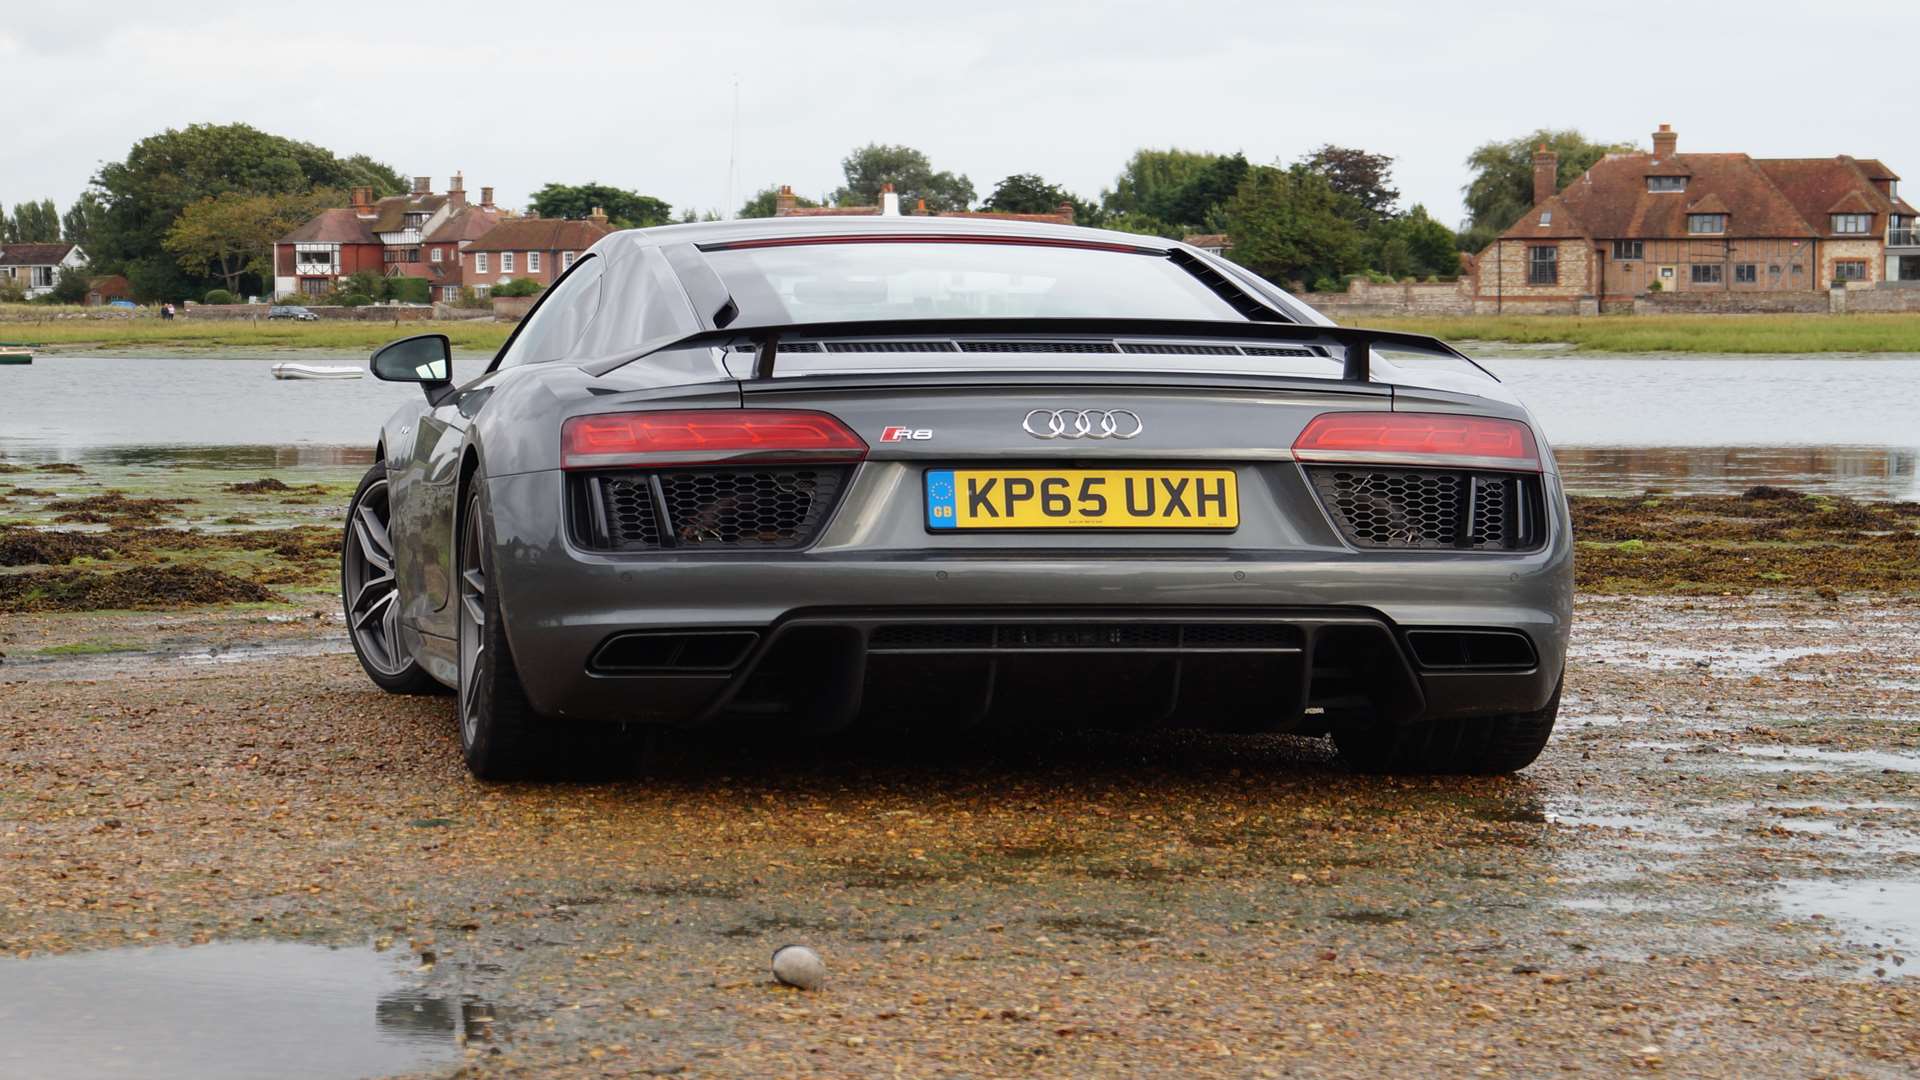 The view most drivers will get of the R8 V10 Plus